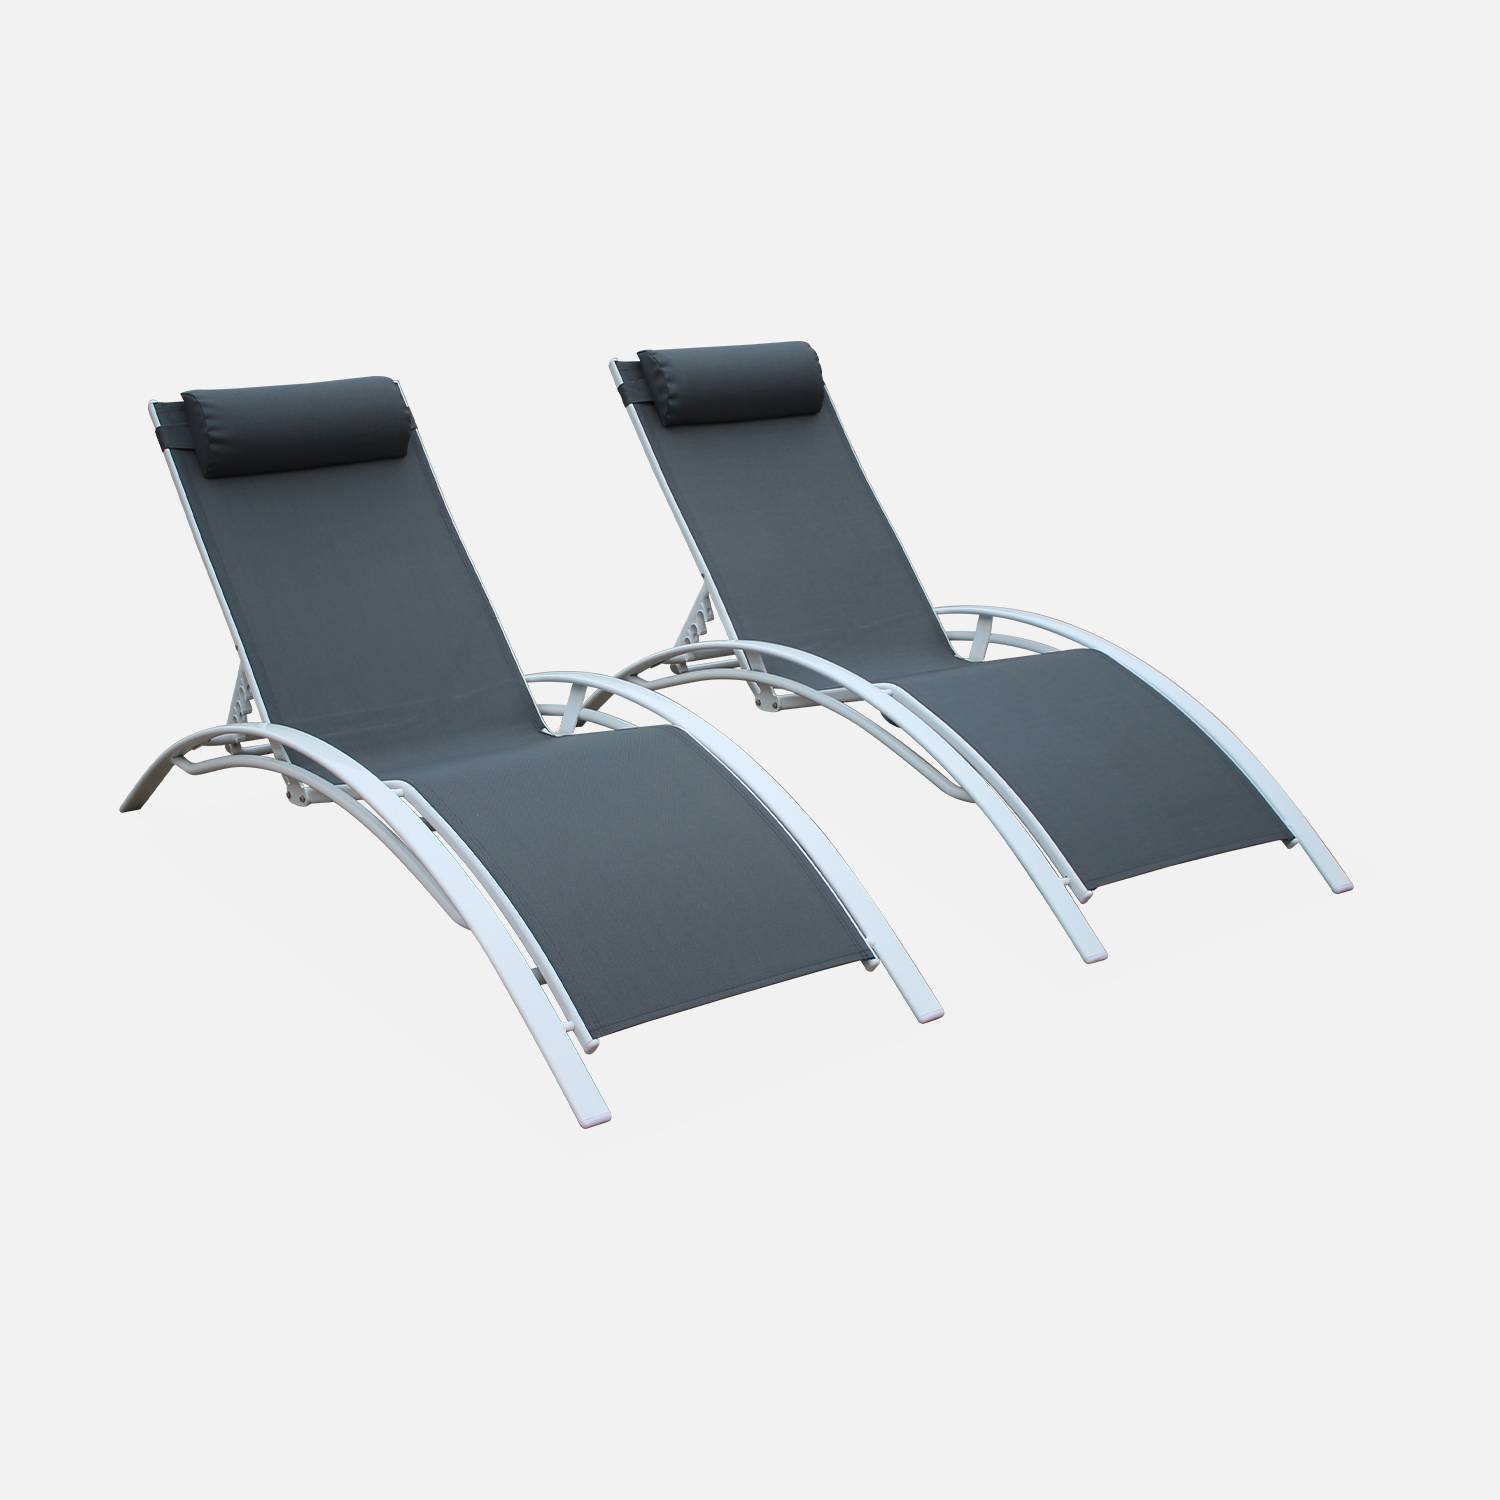 Pair of aluminium and textilene sun loungers, 4 reclining positions, headrest included, stackable - Louisa - White frame, Grey textilene,sweeek,Photo3